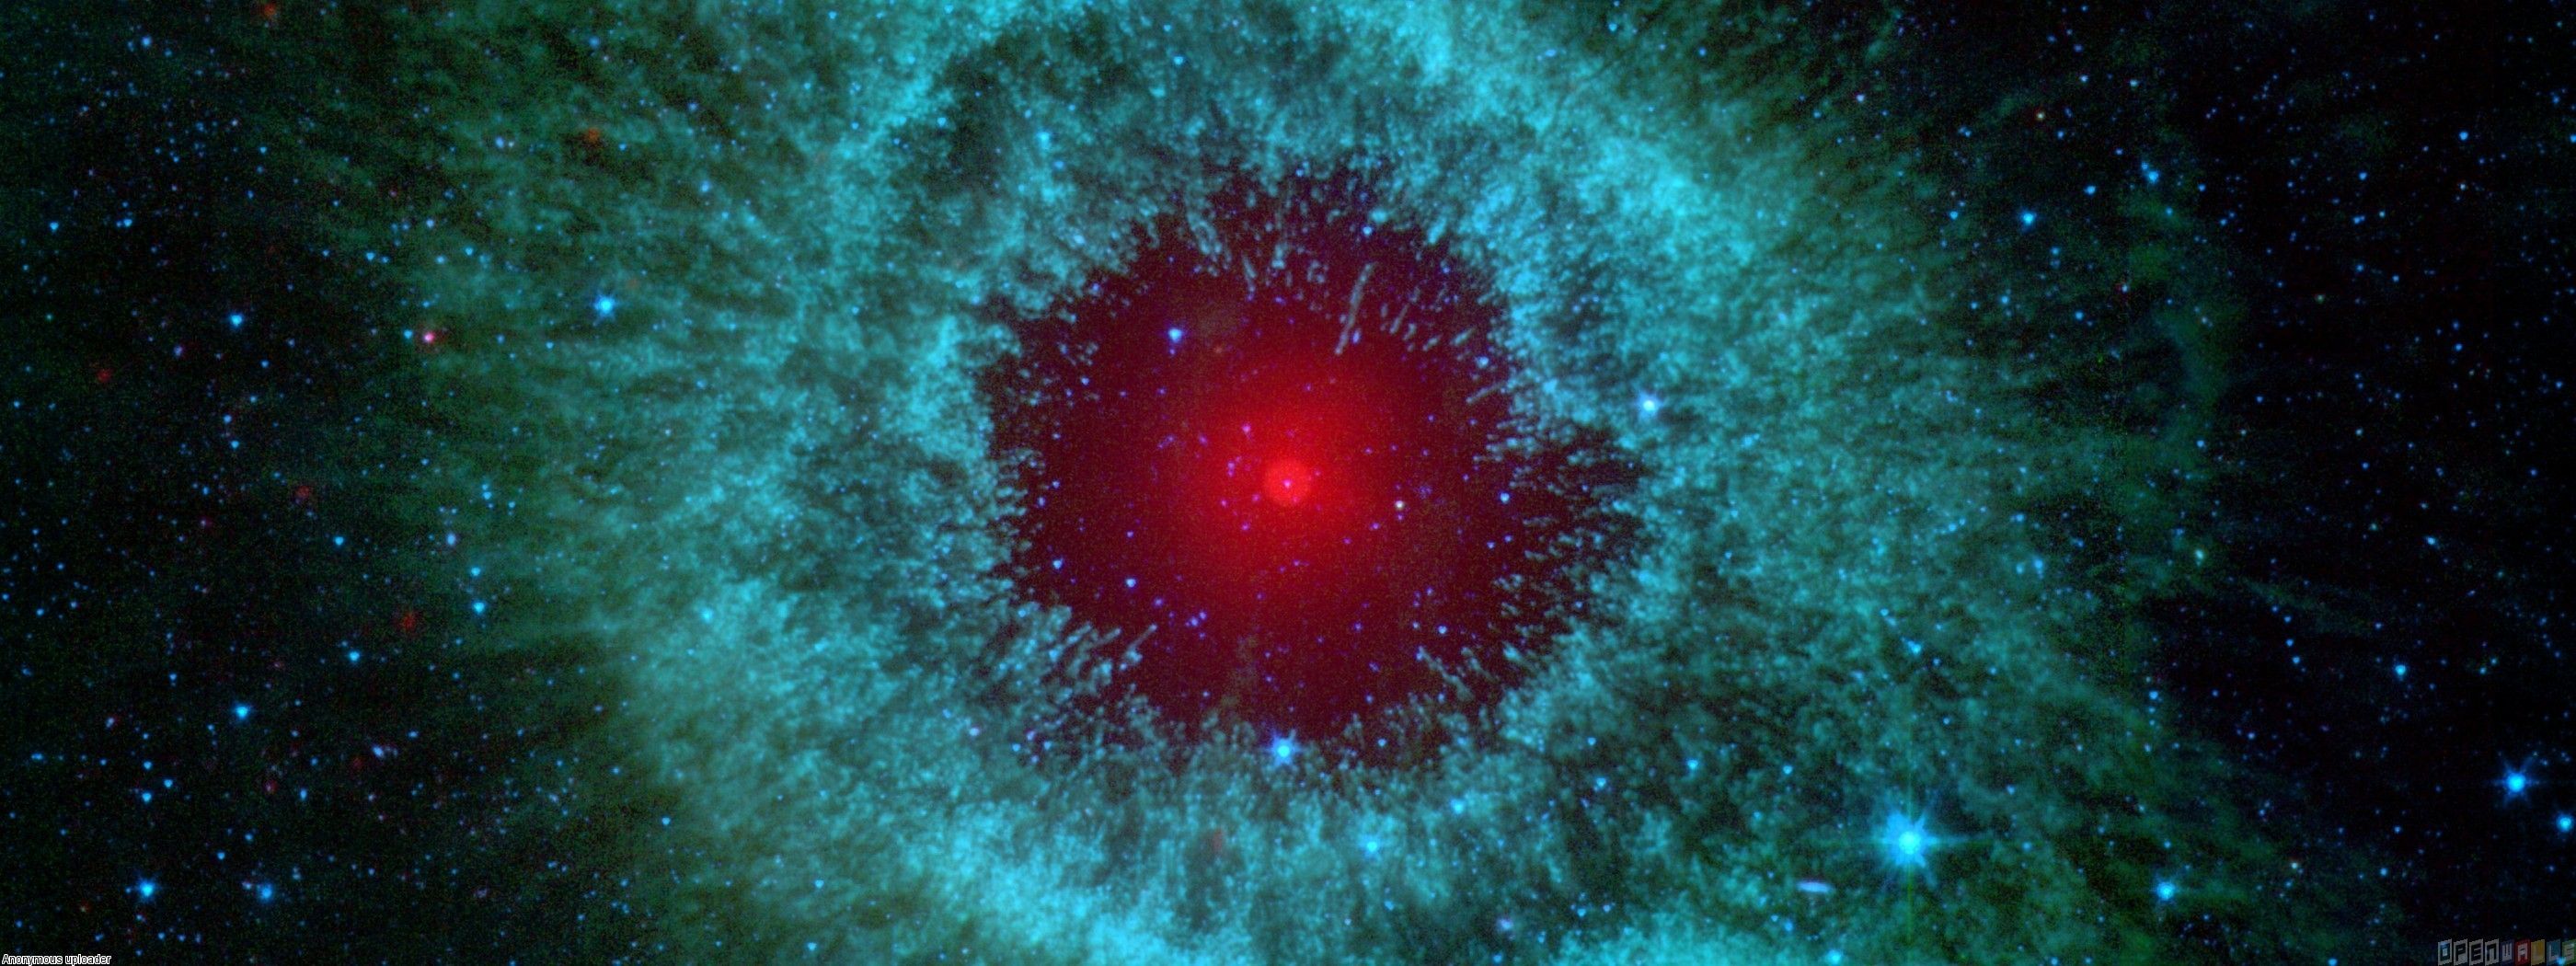 Infrared image of the helix nebula wallpaper - Open Walls